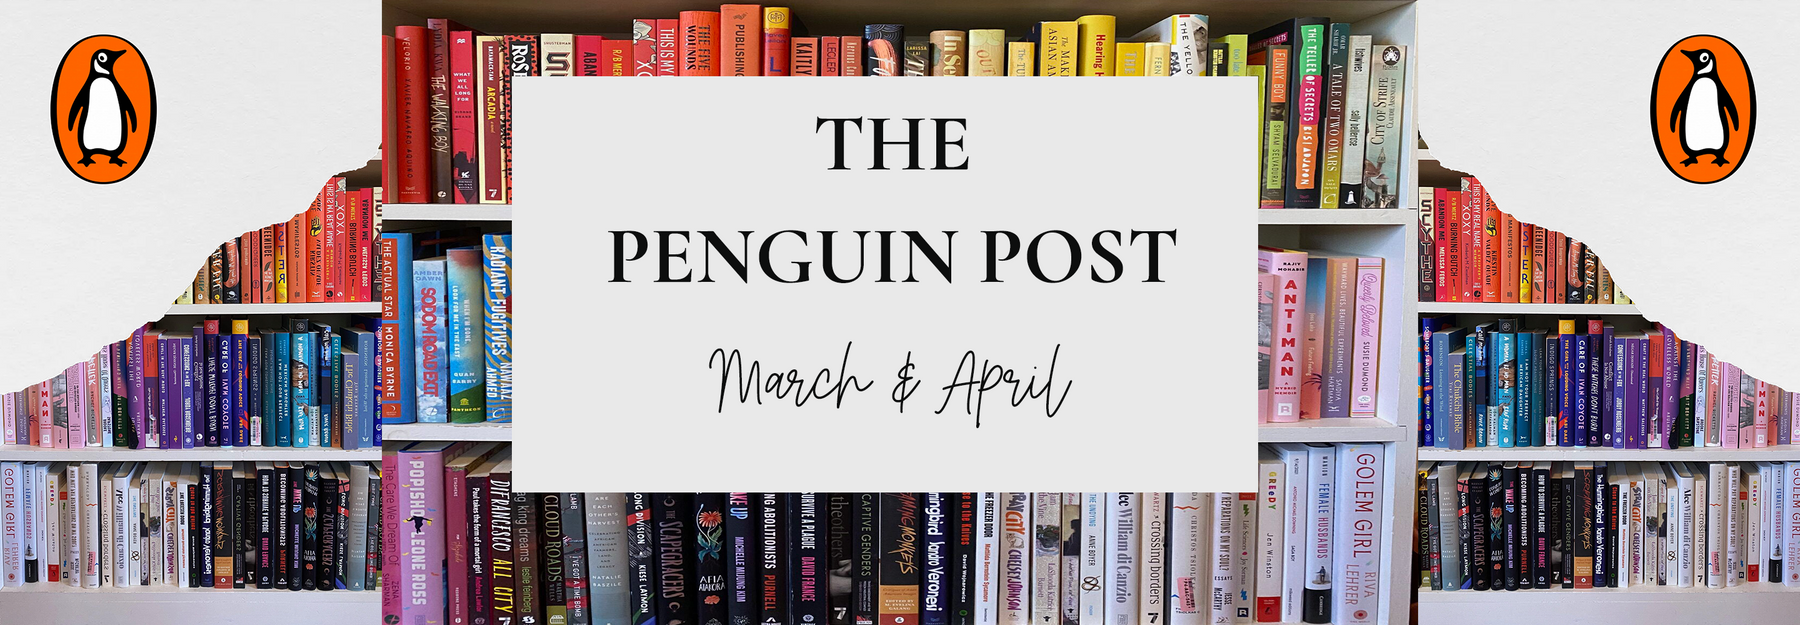 Wordsworth Special Edition of the Penguin Post for March/April